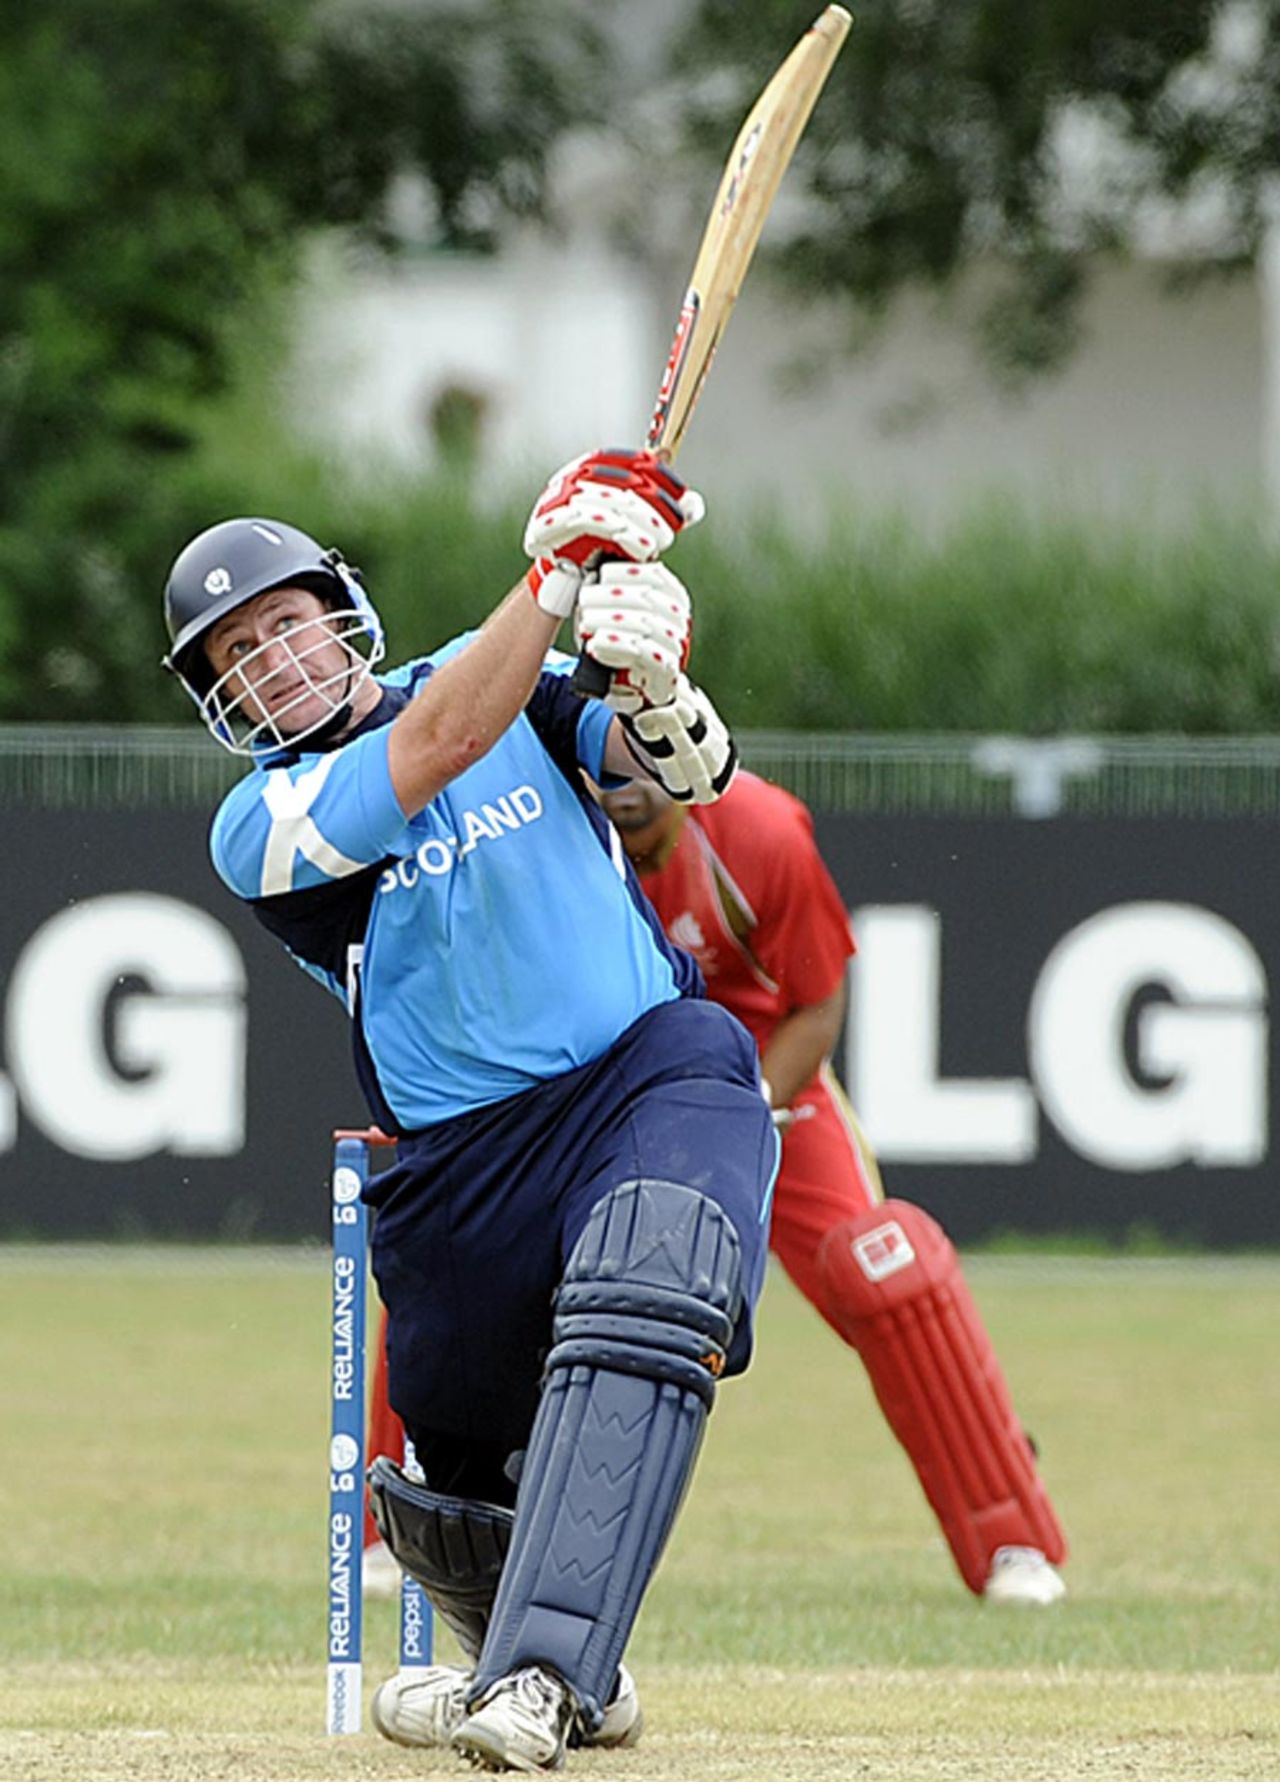 Neil McCallum on his way to 89, Canada v Scotland, ICC WCL Division 1, Amstelveen, July 3 2010